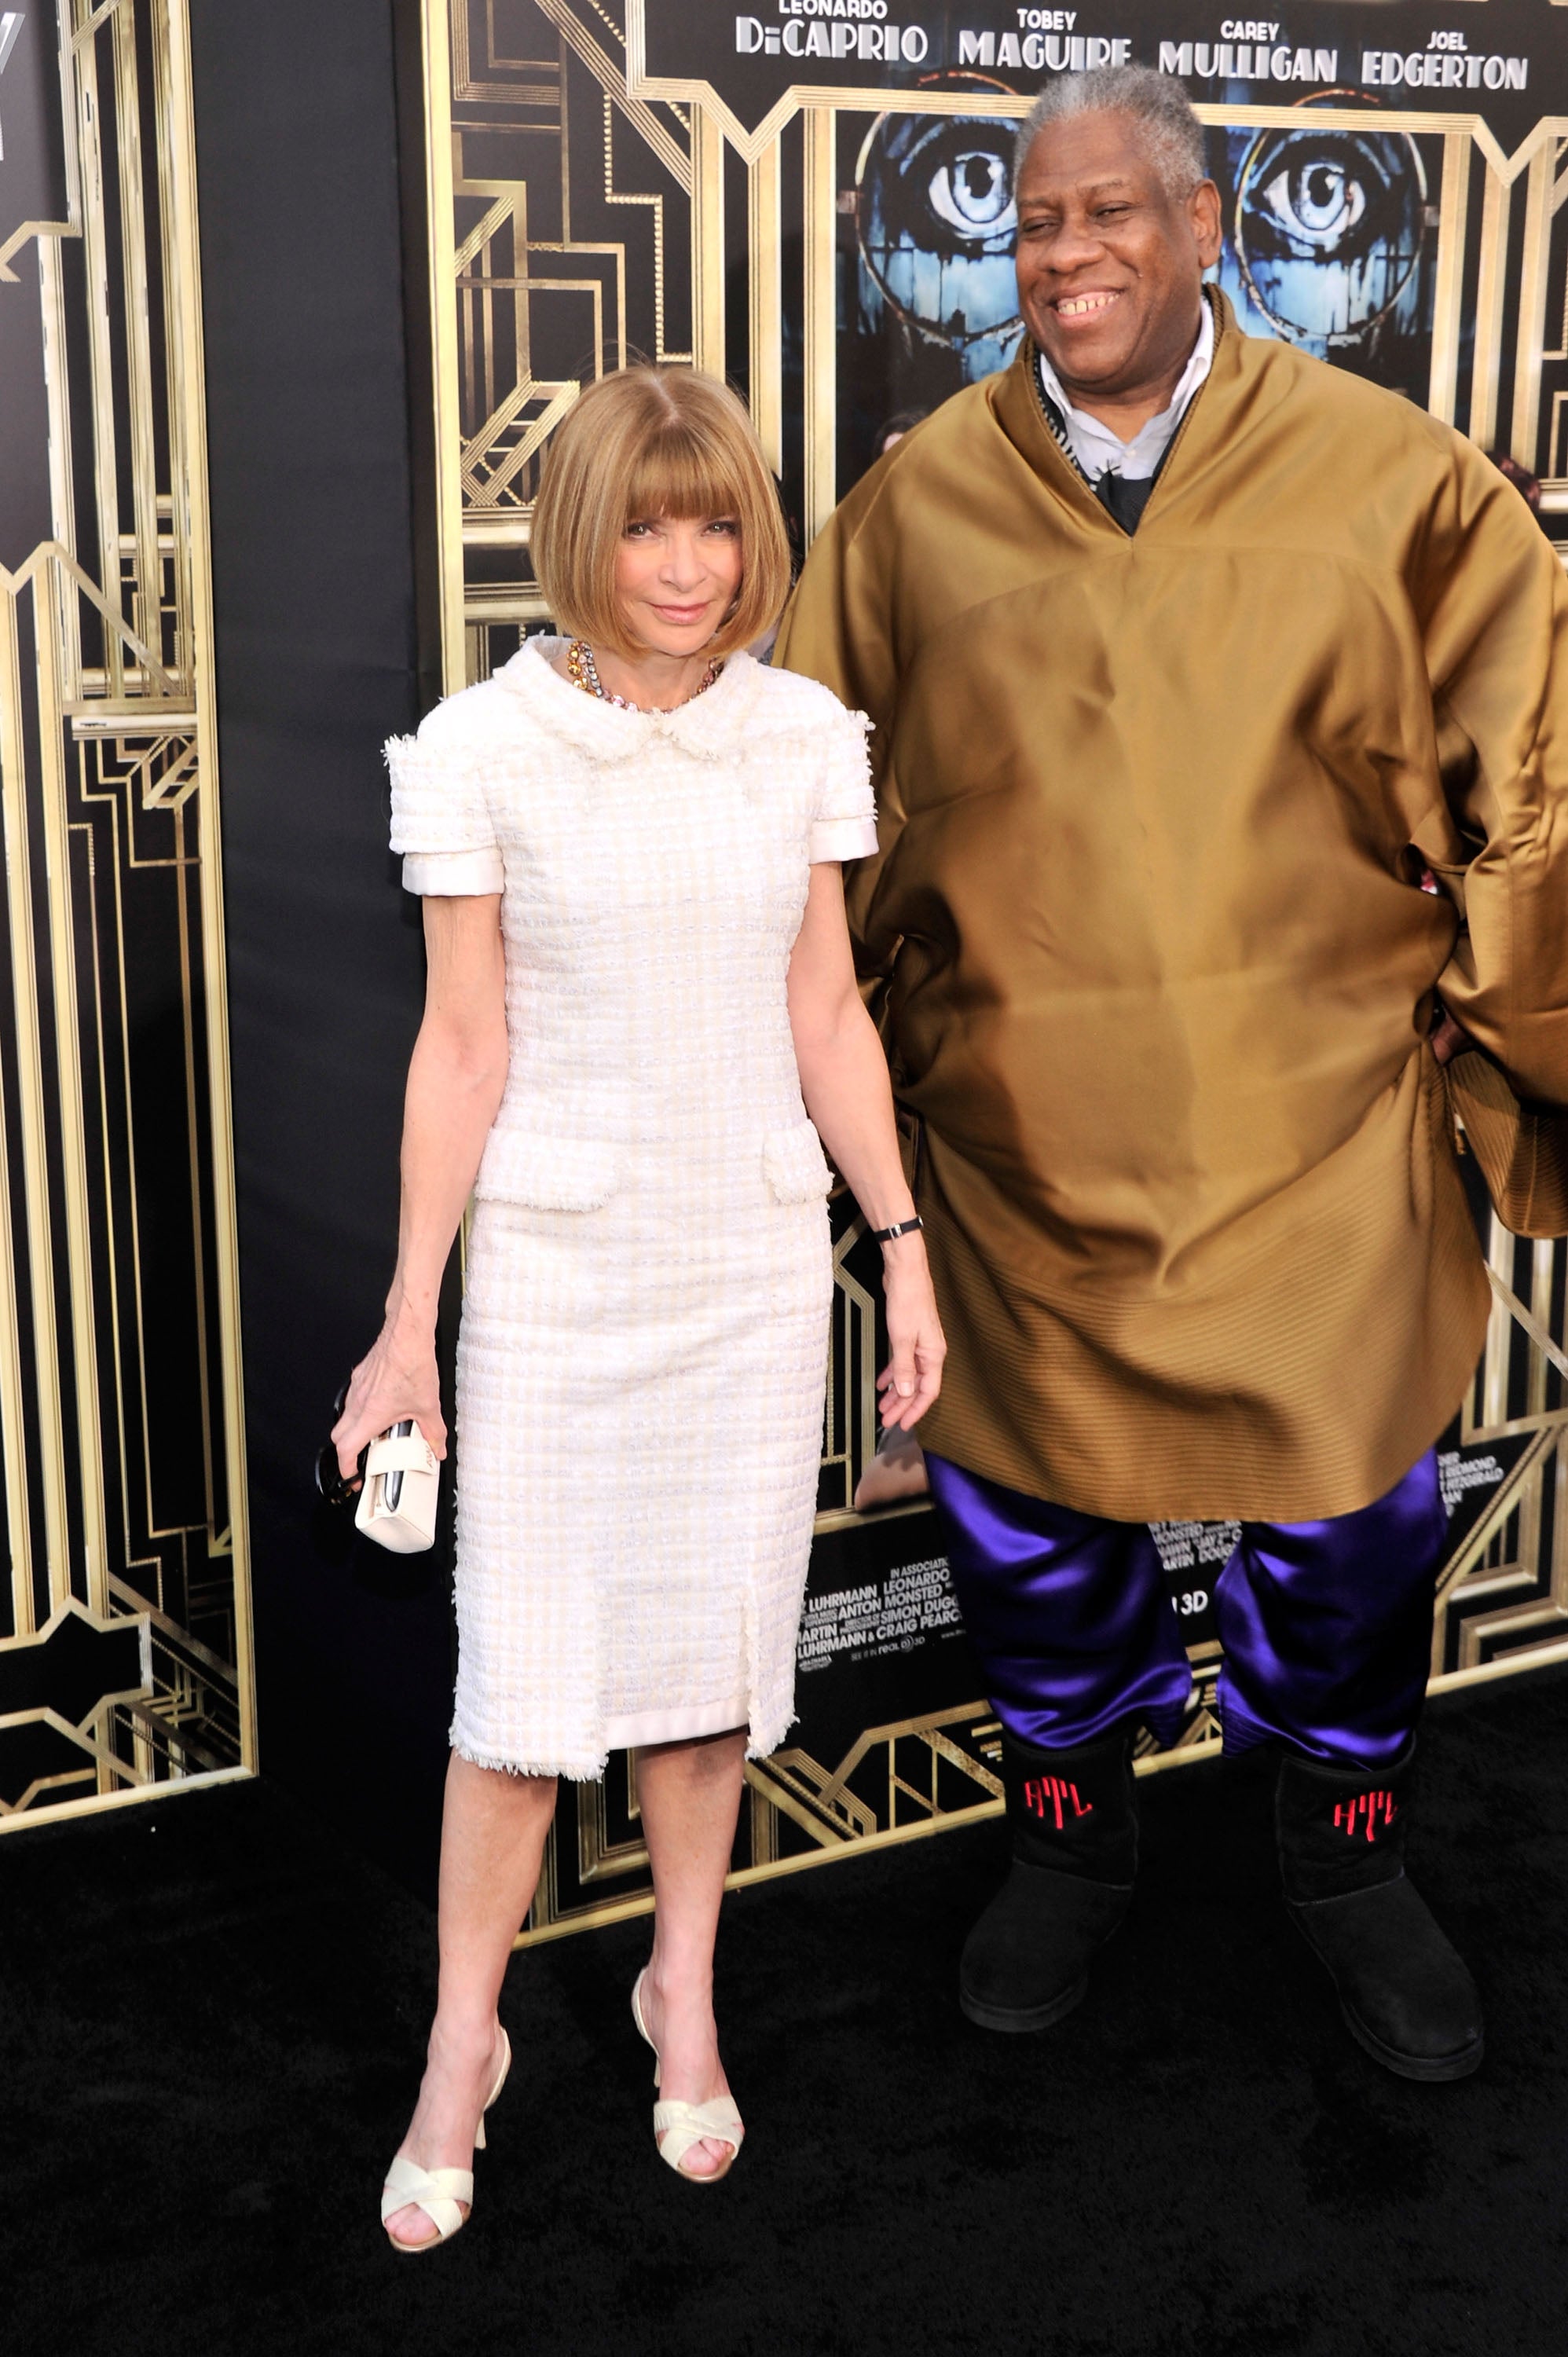 Editor-in-chief of American Vogue Anna Wintour and AndrÃ© Leon Talley attend the "The Great Gatsby" world premiere at Avery Fisher Hall at Lincoln Center for the Performing Arts on May 1, 2013